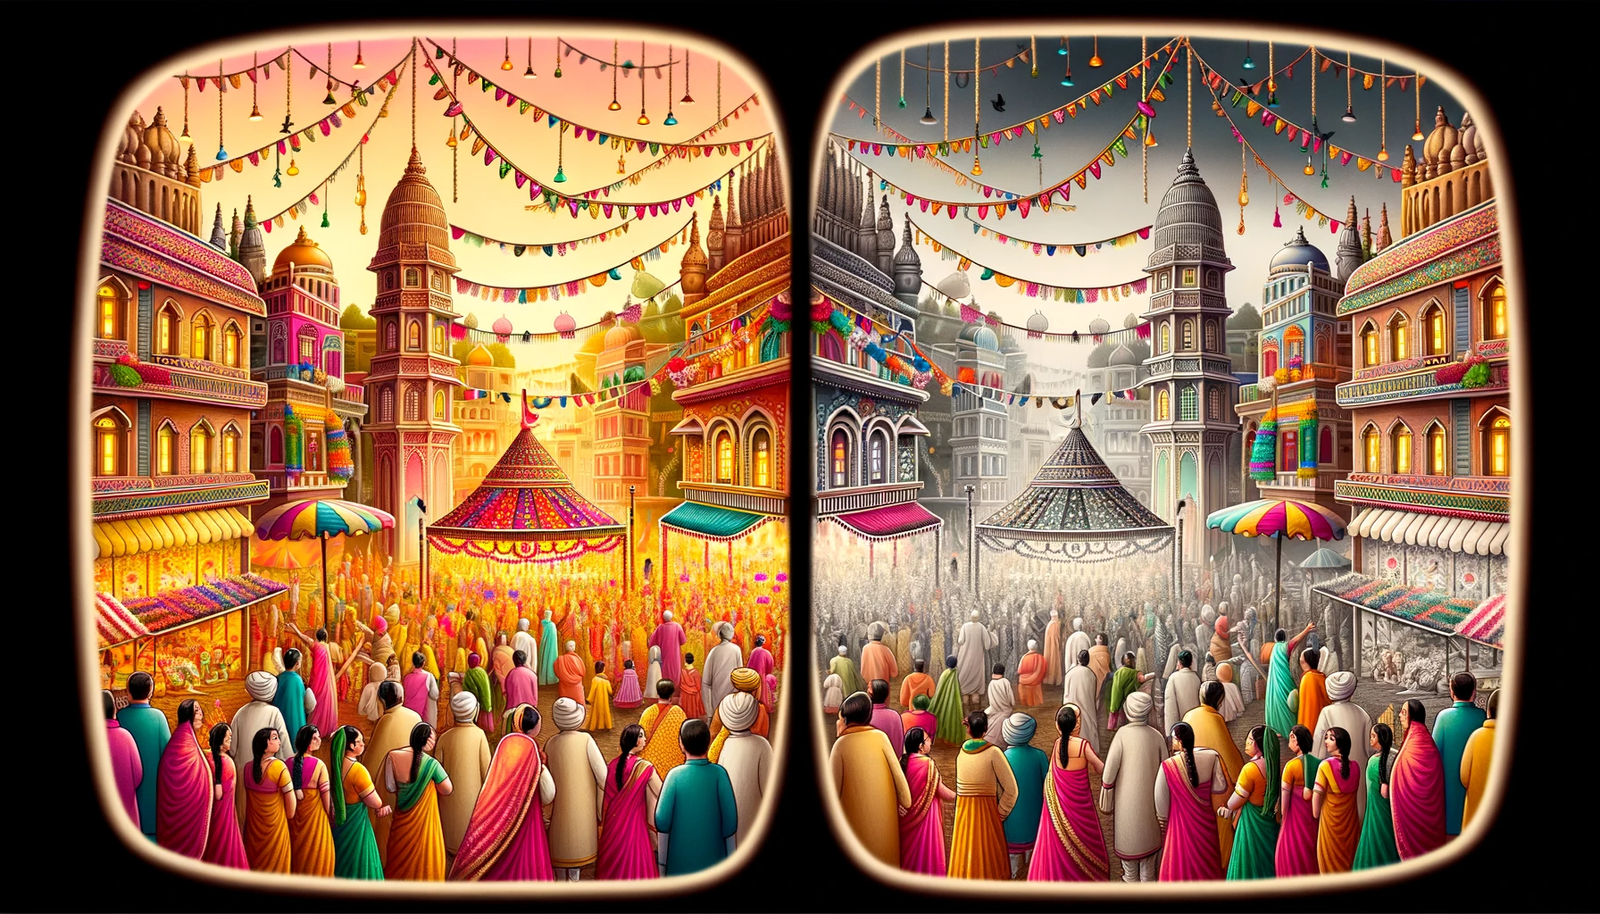  Illustration of a split screen_ one side depicting a vibrant and clear Indian festival scene and the other side showcasing the same scene but blurred 